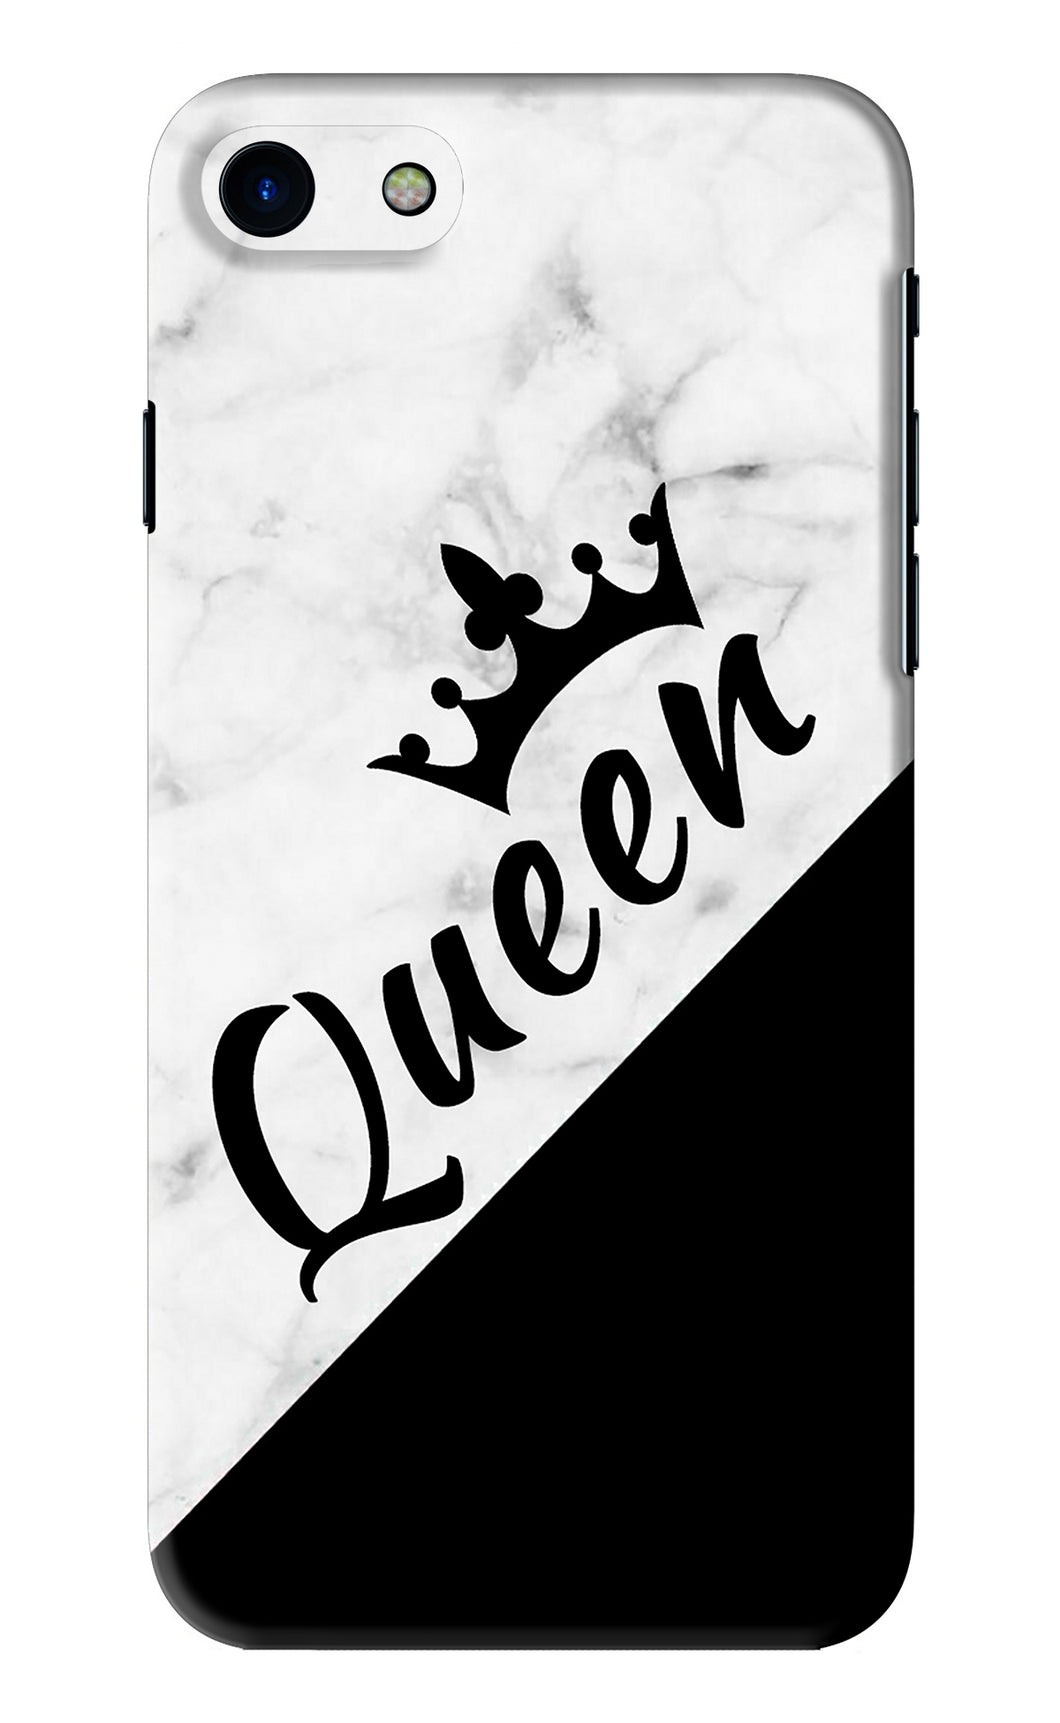 Queen iPhone SE 2020 Back Skin Wrap